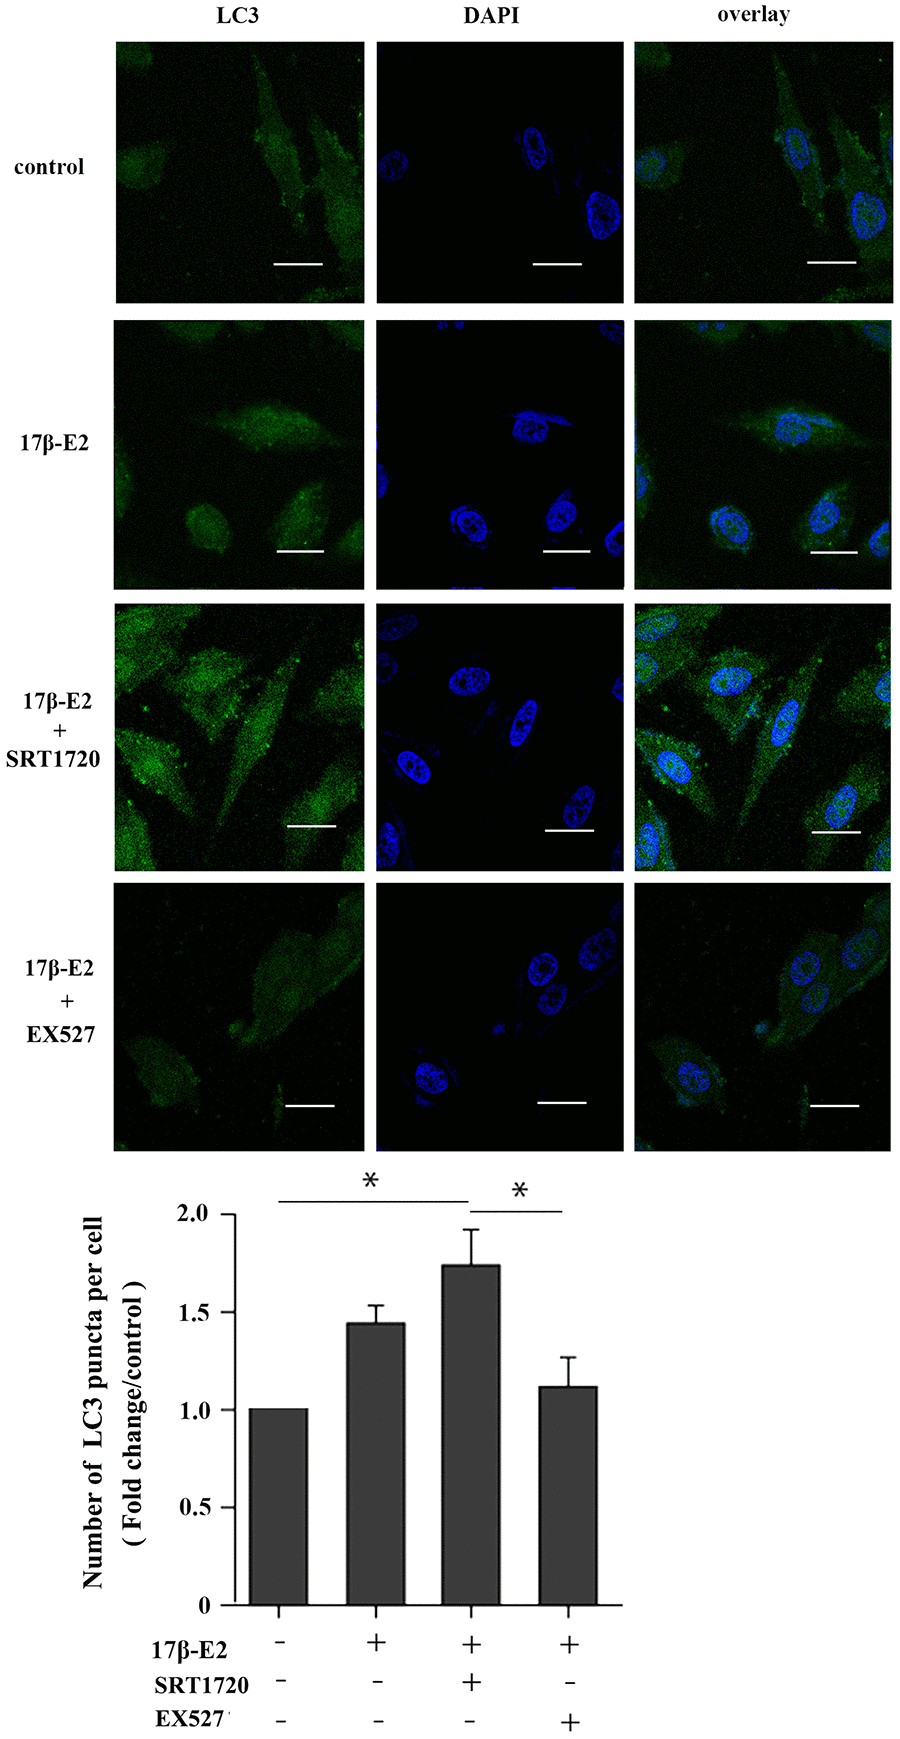 Effect of SIRT1 up-regulation induced by17β-E2 on the expression of LC3 in hFOB1.19 osteoblasts. SRT1720 or EX527 regulated the expression of LC3 in 17β-E2-treated osteoblasts, as determined using immunofluorescence staining. Nuclei were stained with DAPI (blue). Representative images and quantified analysis of immunofluorescence staining showing the LC3 in cells. White bar = 50 μm. The histogram showed the number of LC3 puncta in various groups as indicated. The data were expressed as the means ± SD from 3 independent experiments. Statistically significance was evaluated using the Student’s t-test. * P 